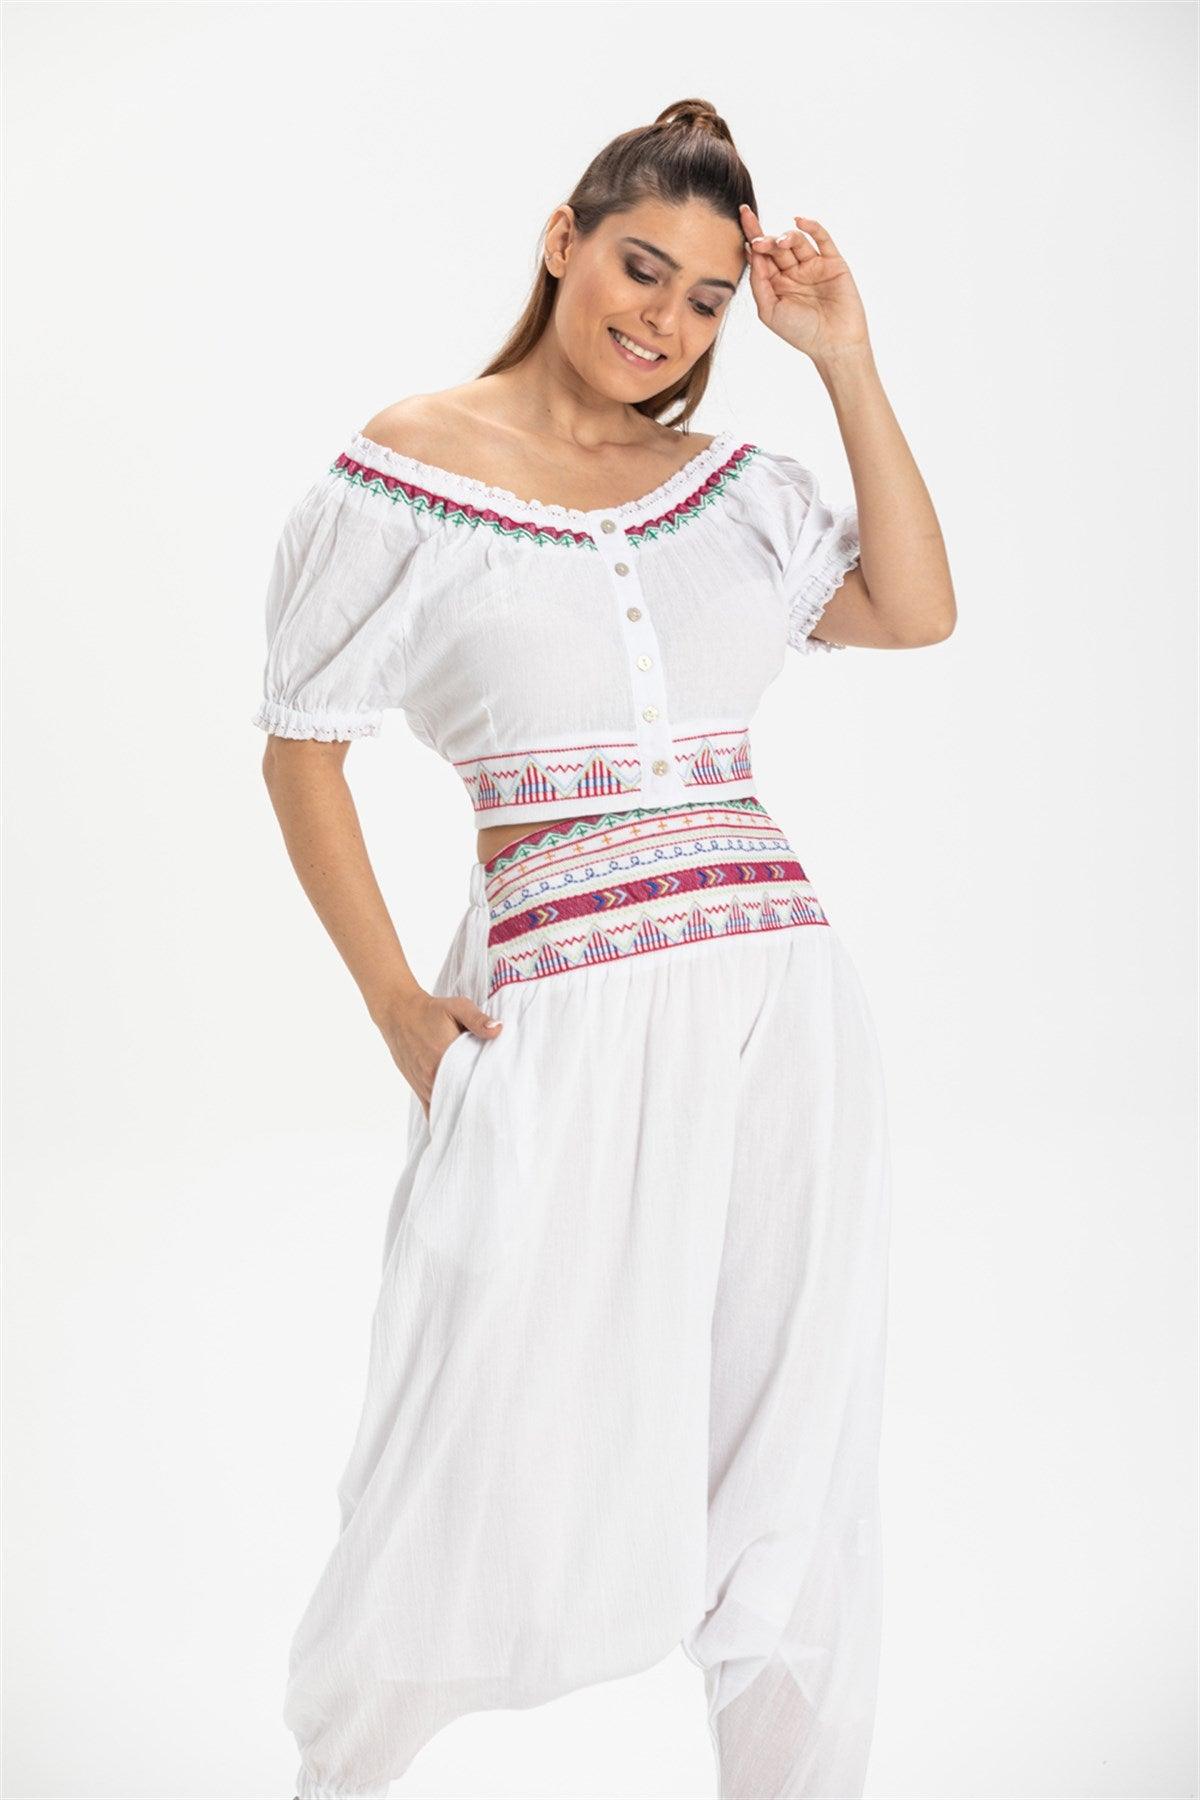 Short Sleeve Off The Shoulder Ethnic Embroidered Button Down White Bustier - trendynow